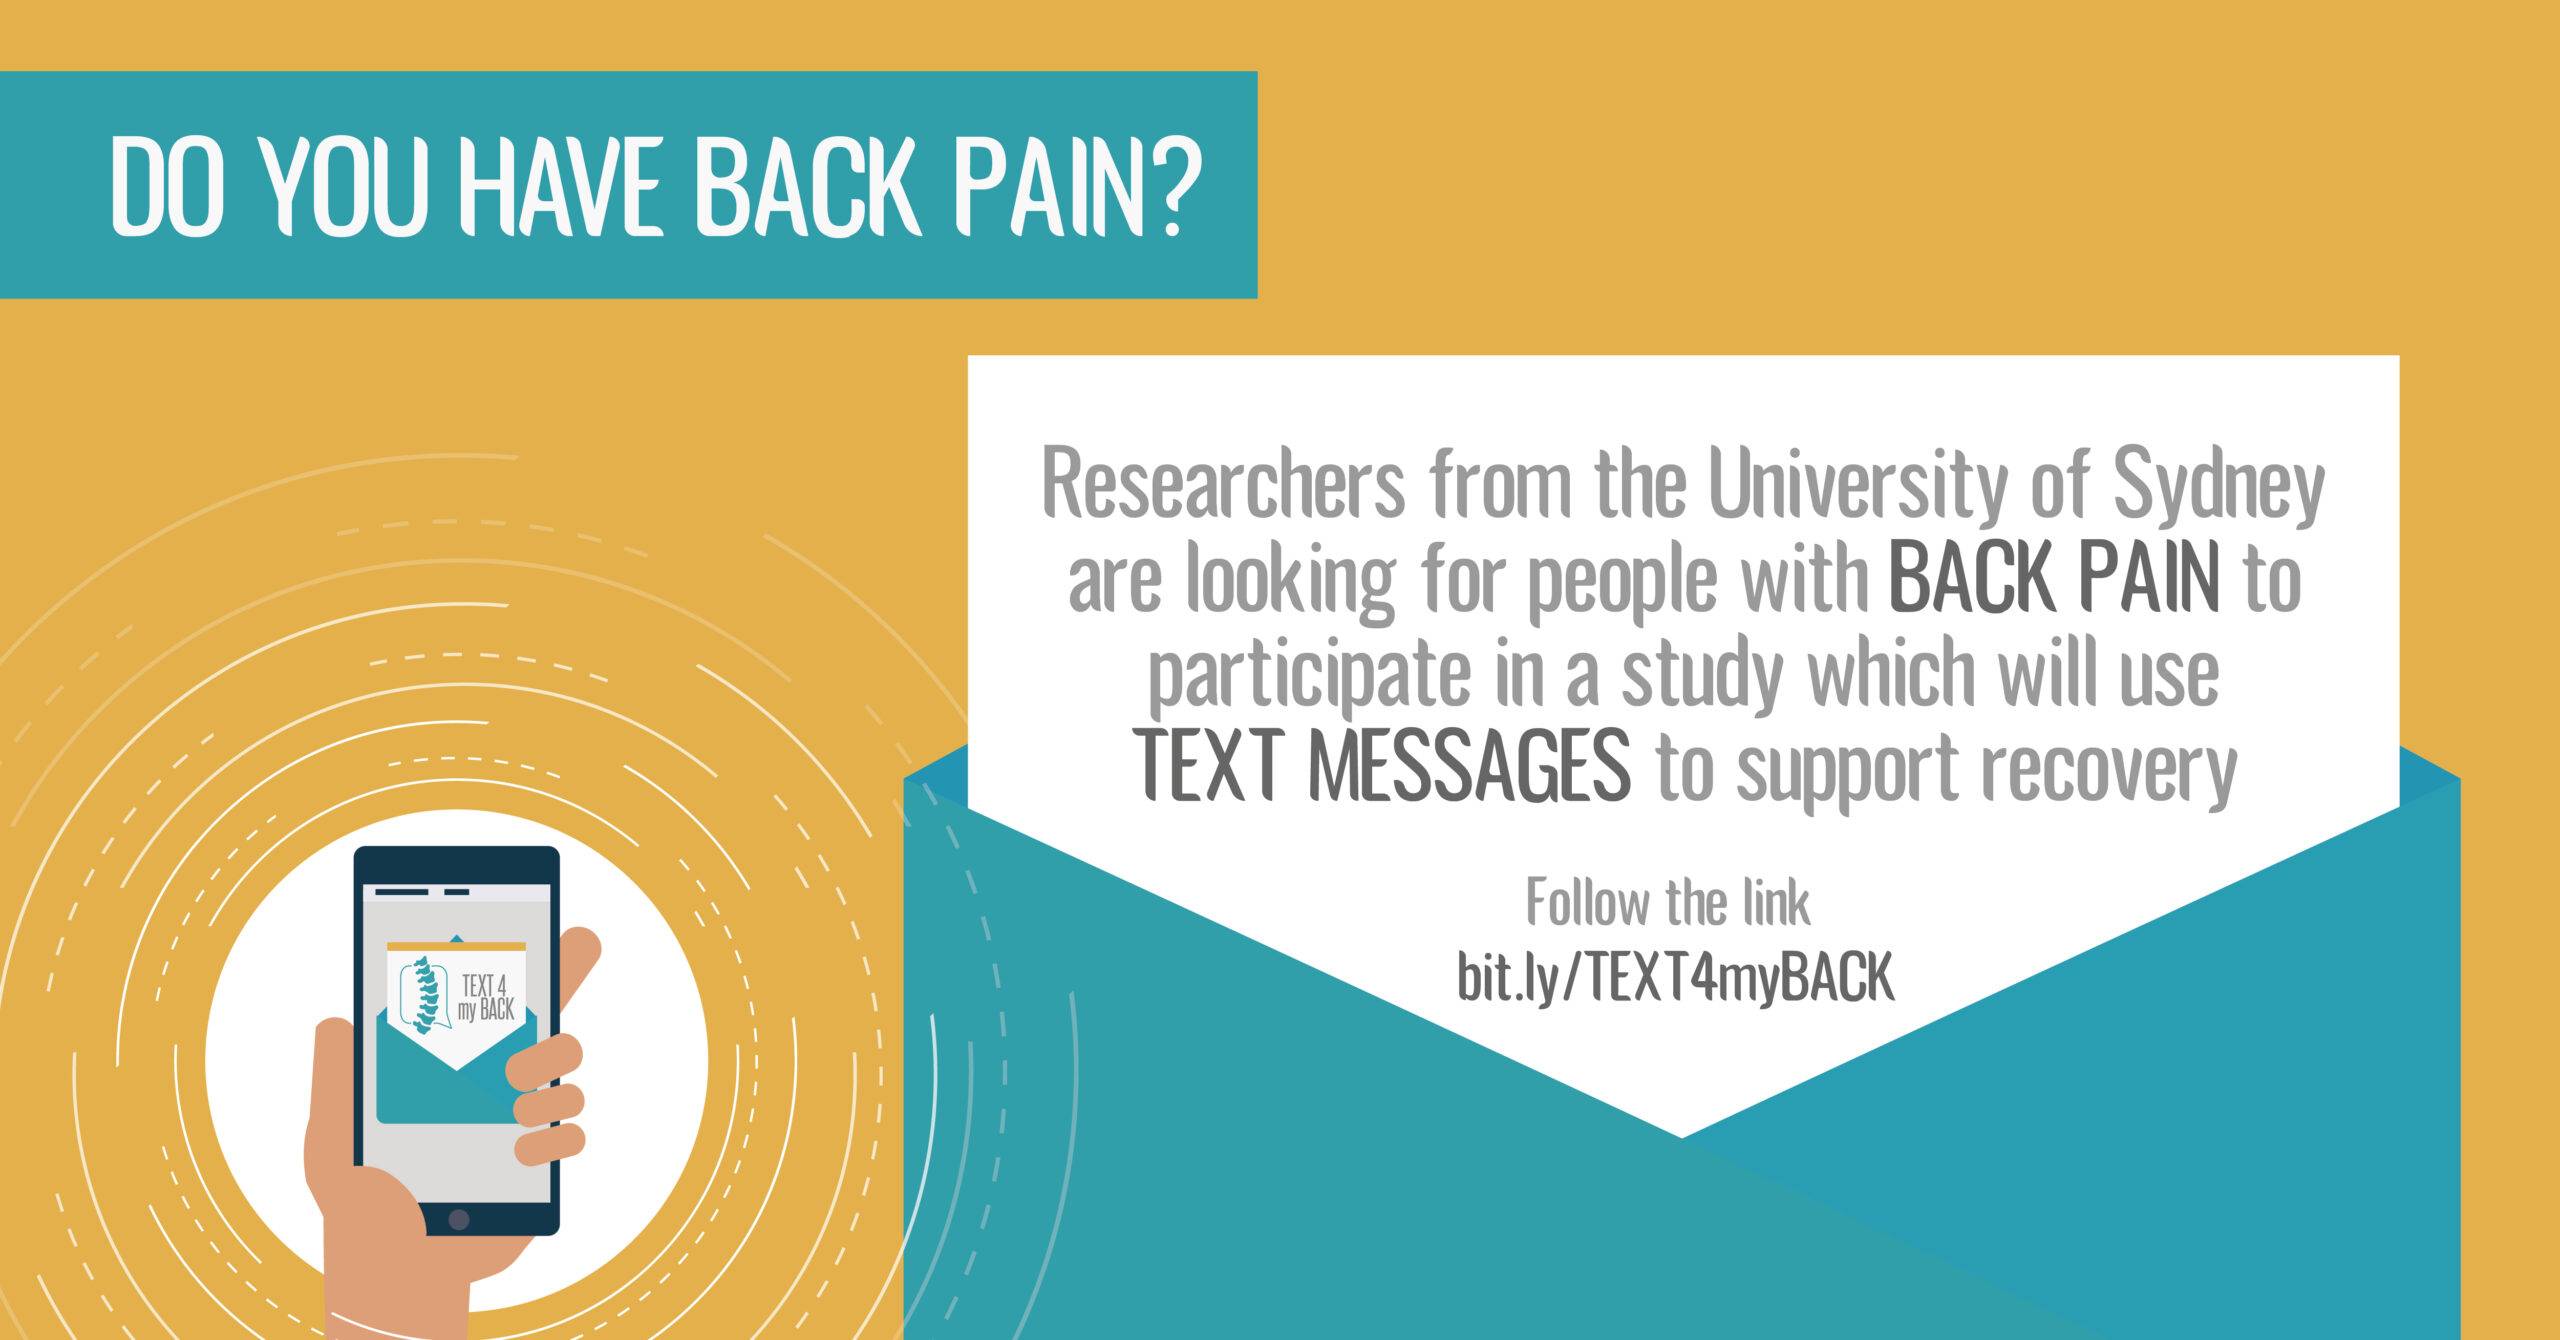 Studies now recruiting: TEXT4myBACK – an online study to help